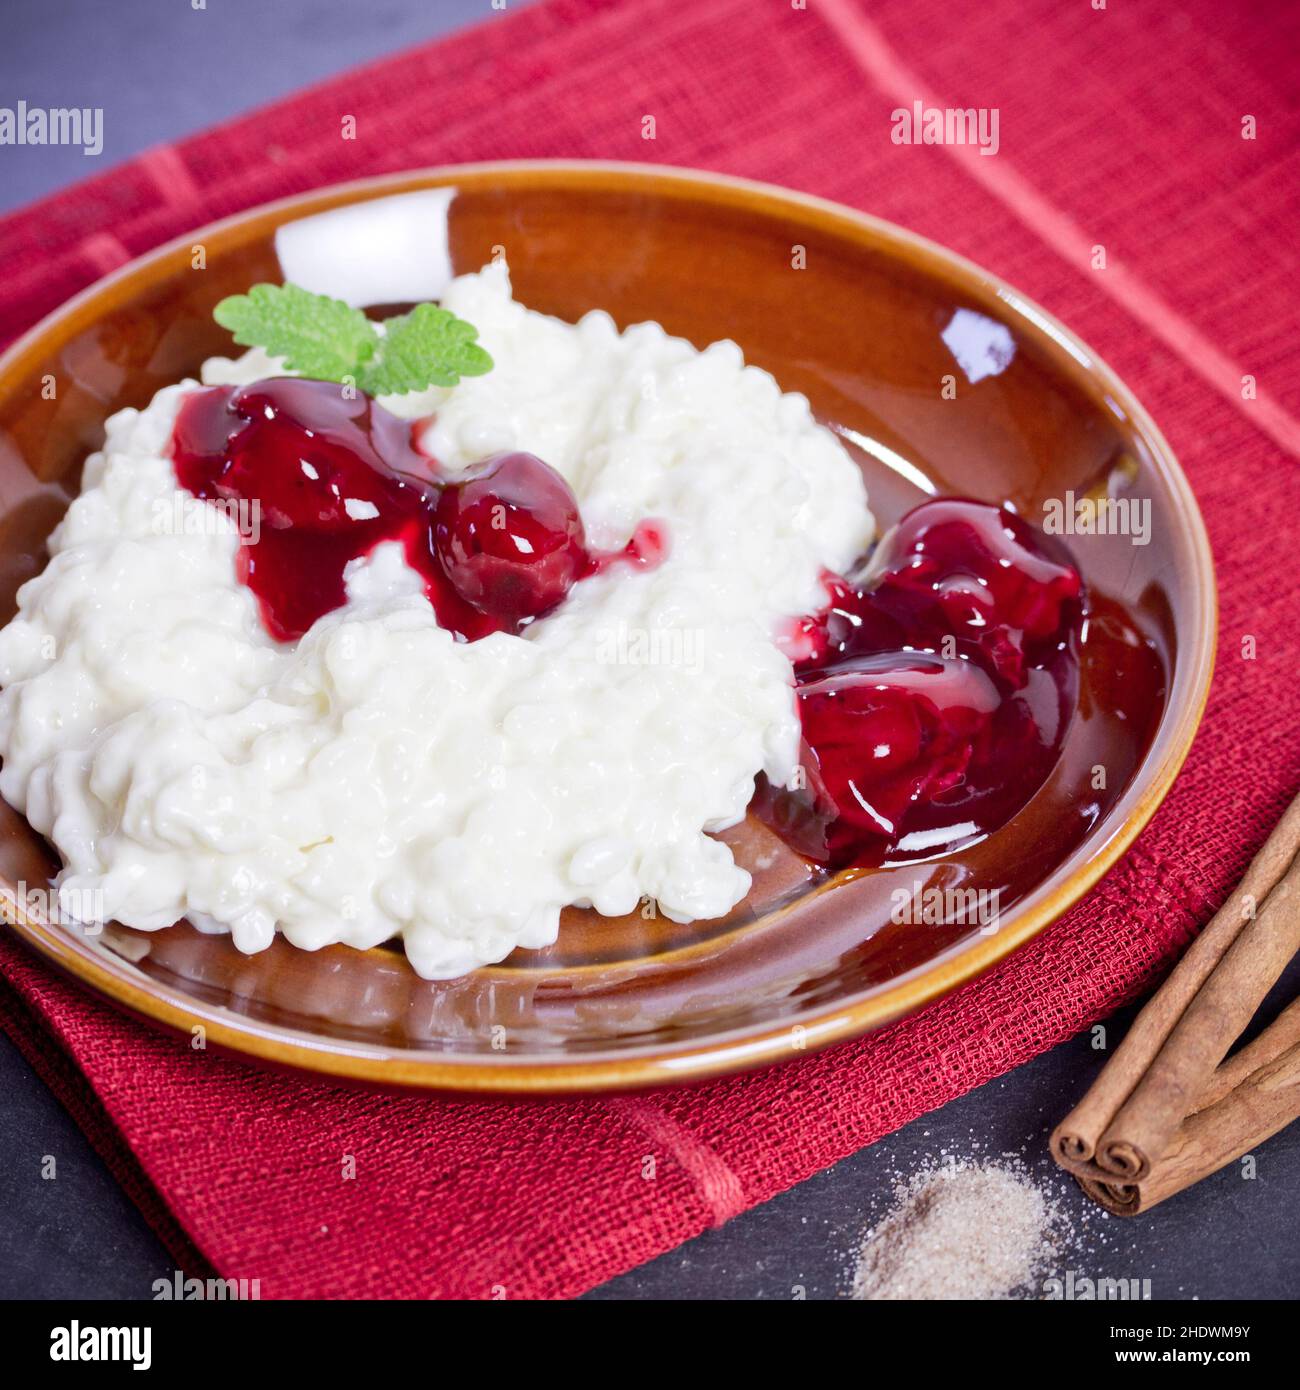 dessert, rice pudding, grout, desserts, grouts Stock Photo